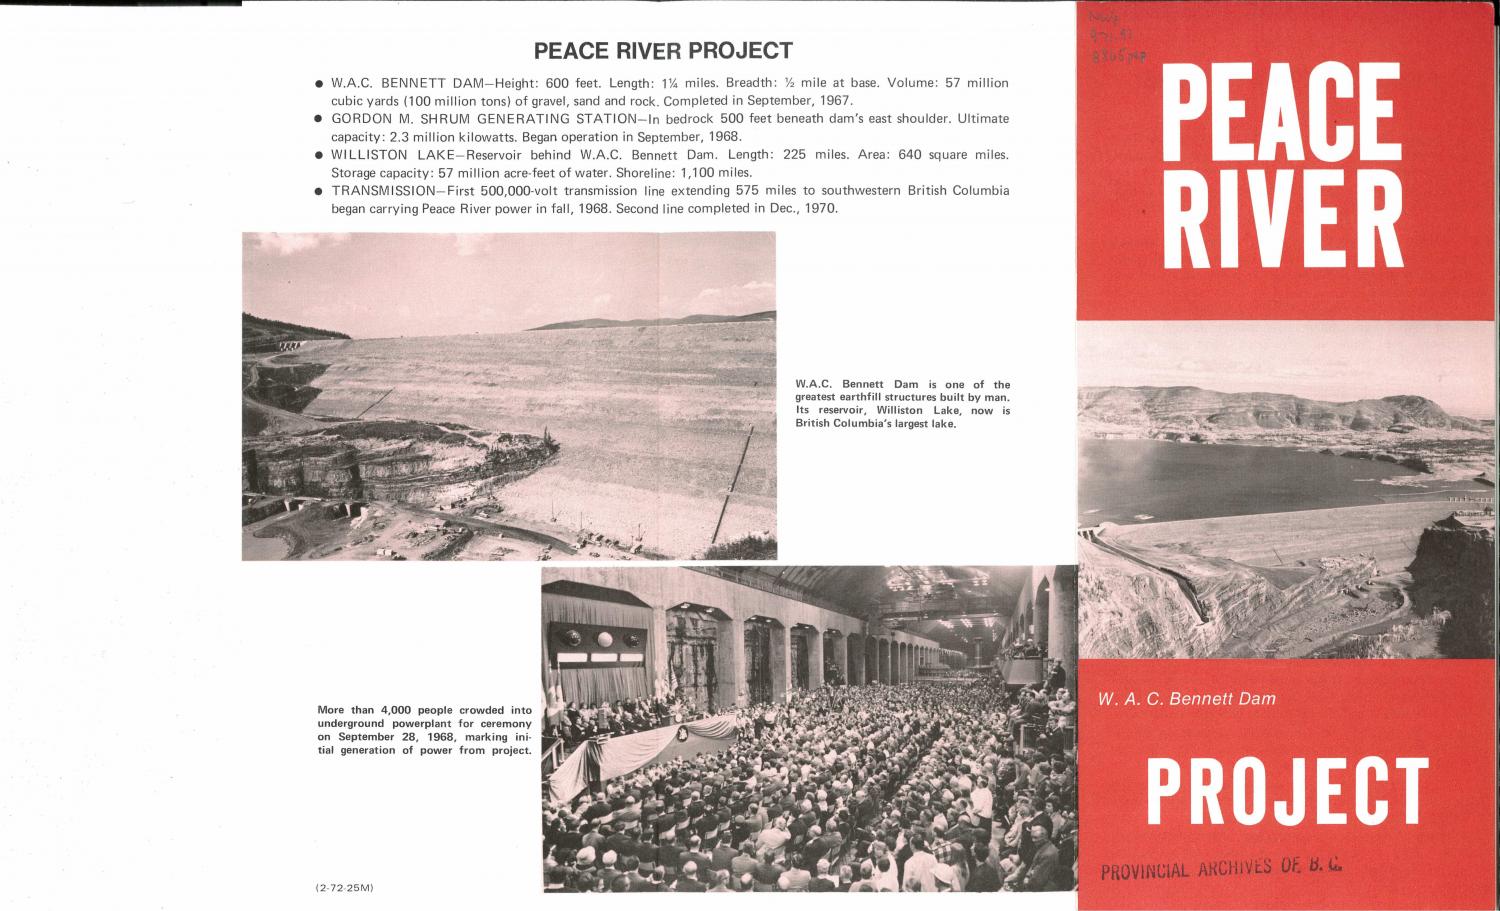 Promotional material for the W.A.C. Bennett Dam.